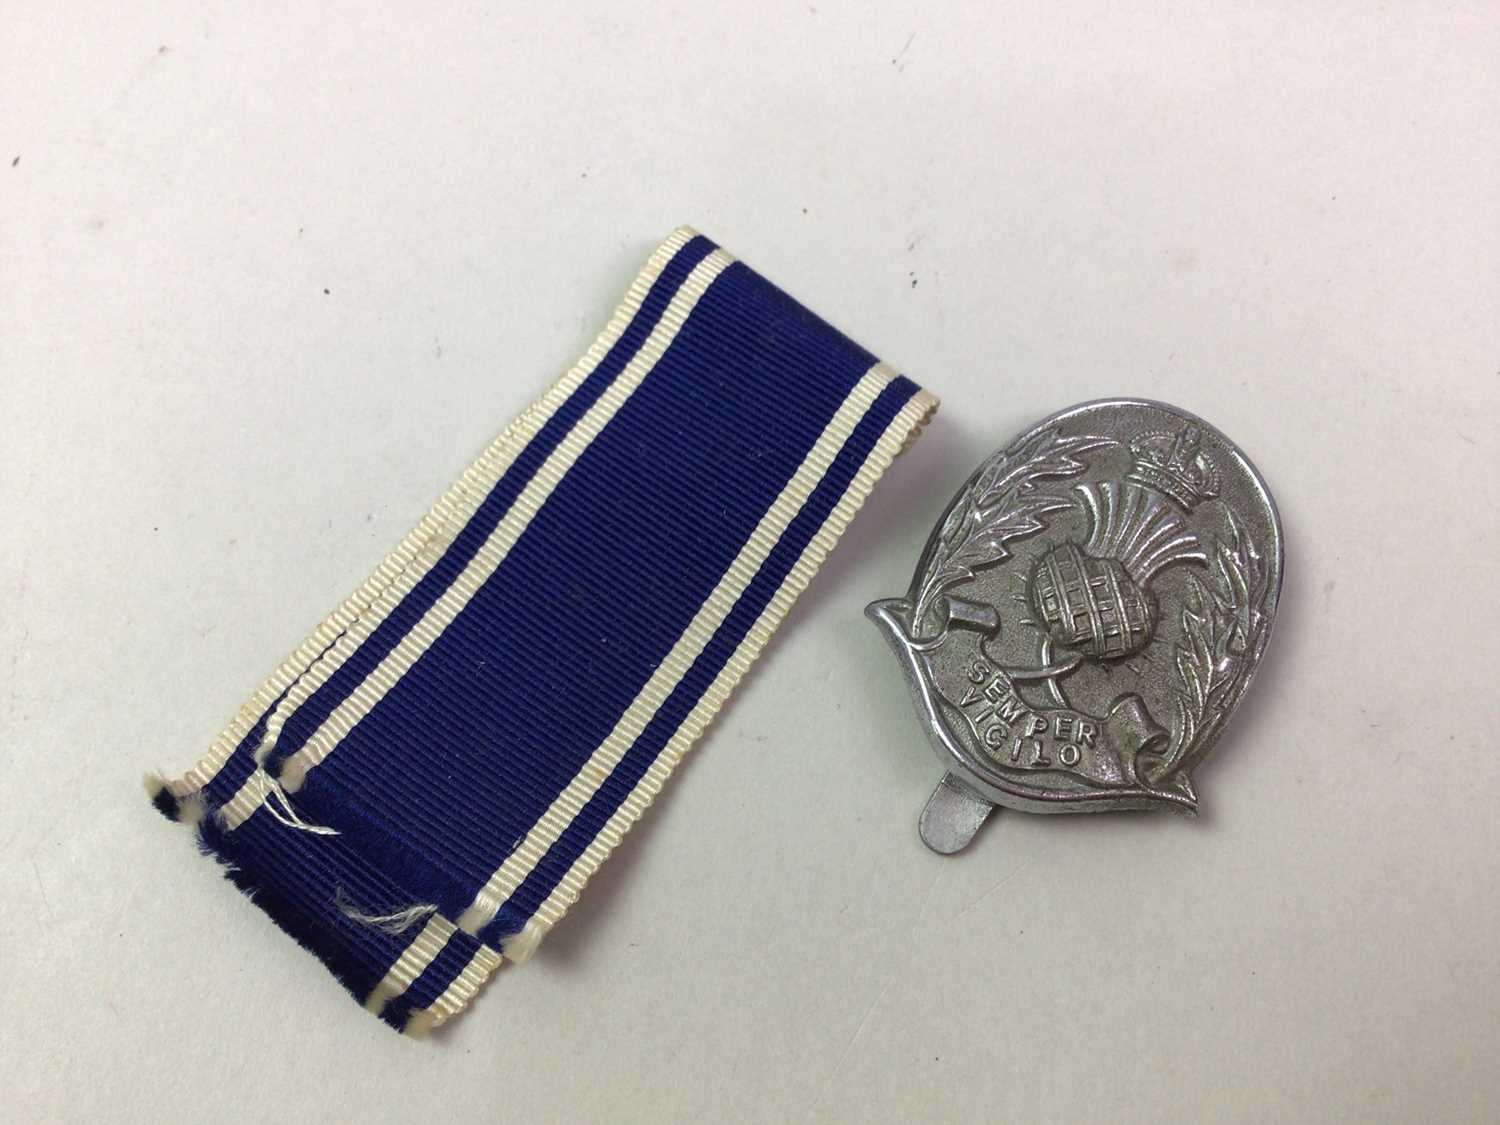 GEORGE VI FOR EXEMPLARY POLICE SERVICE MEDAL, ALONG WITH A POLICE CAP BADGE - Image 2 of 3